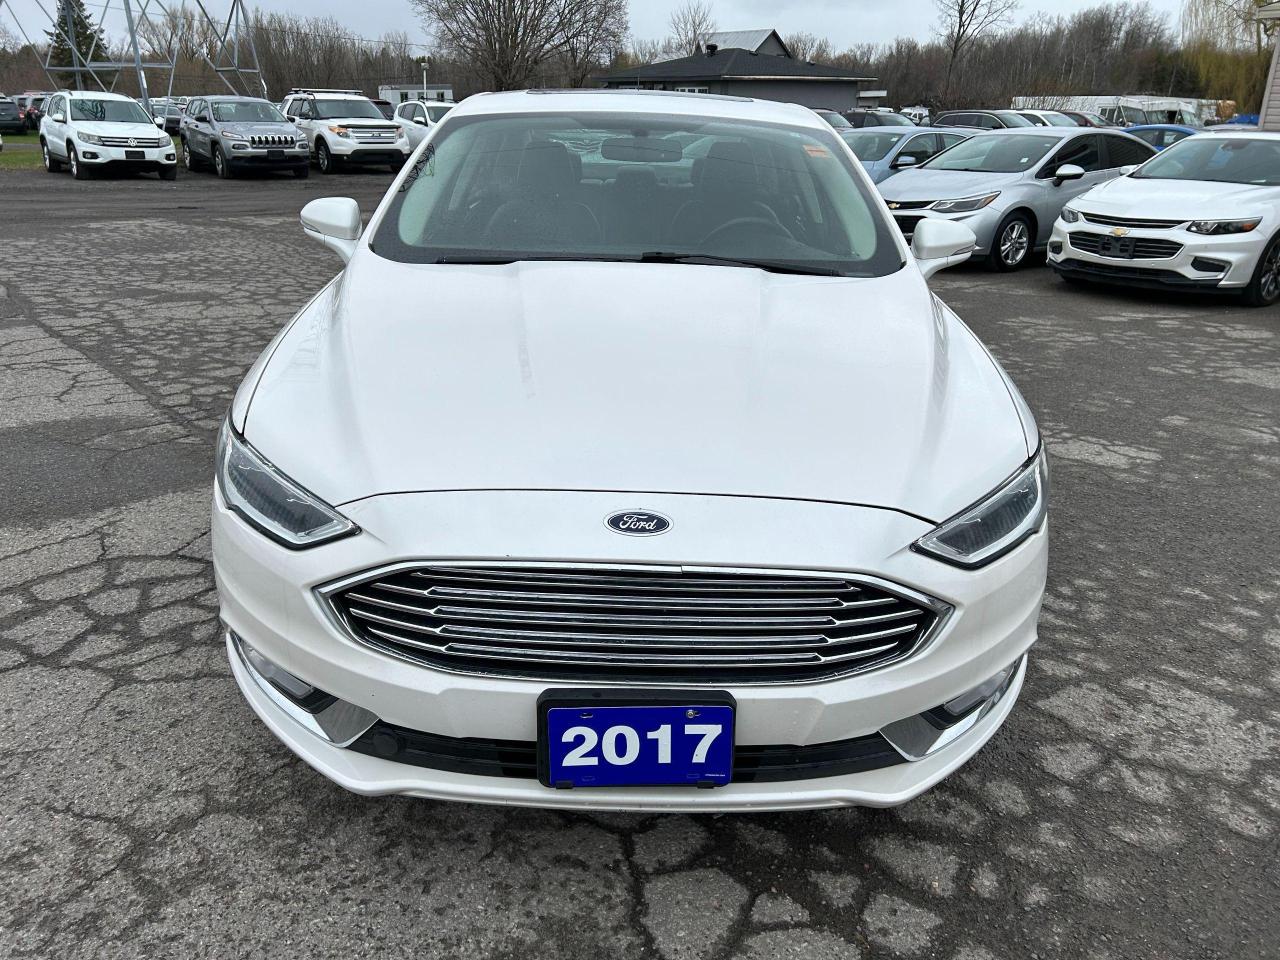 2017 Ford Fusion 4DR SDN SE AWD - Photo #1